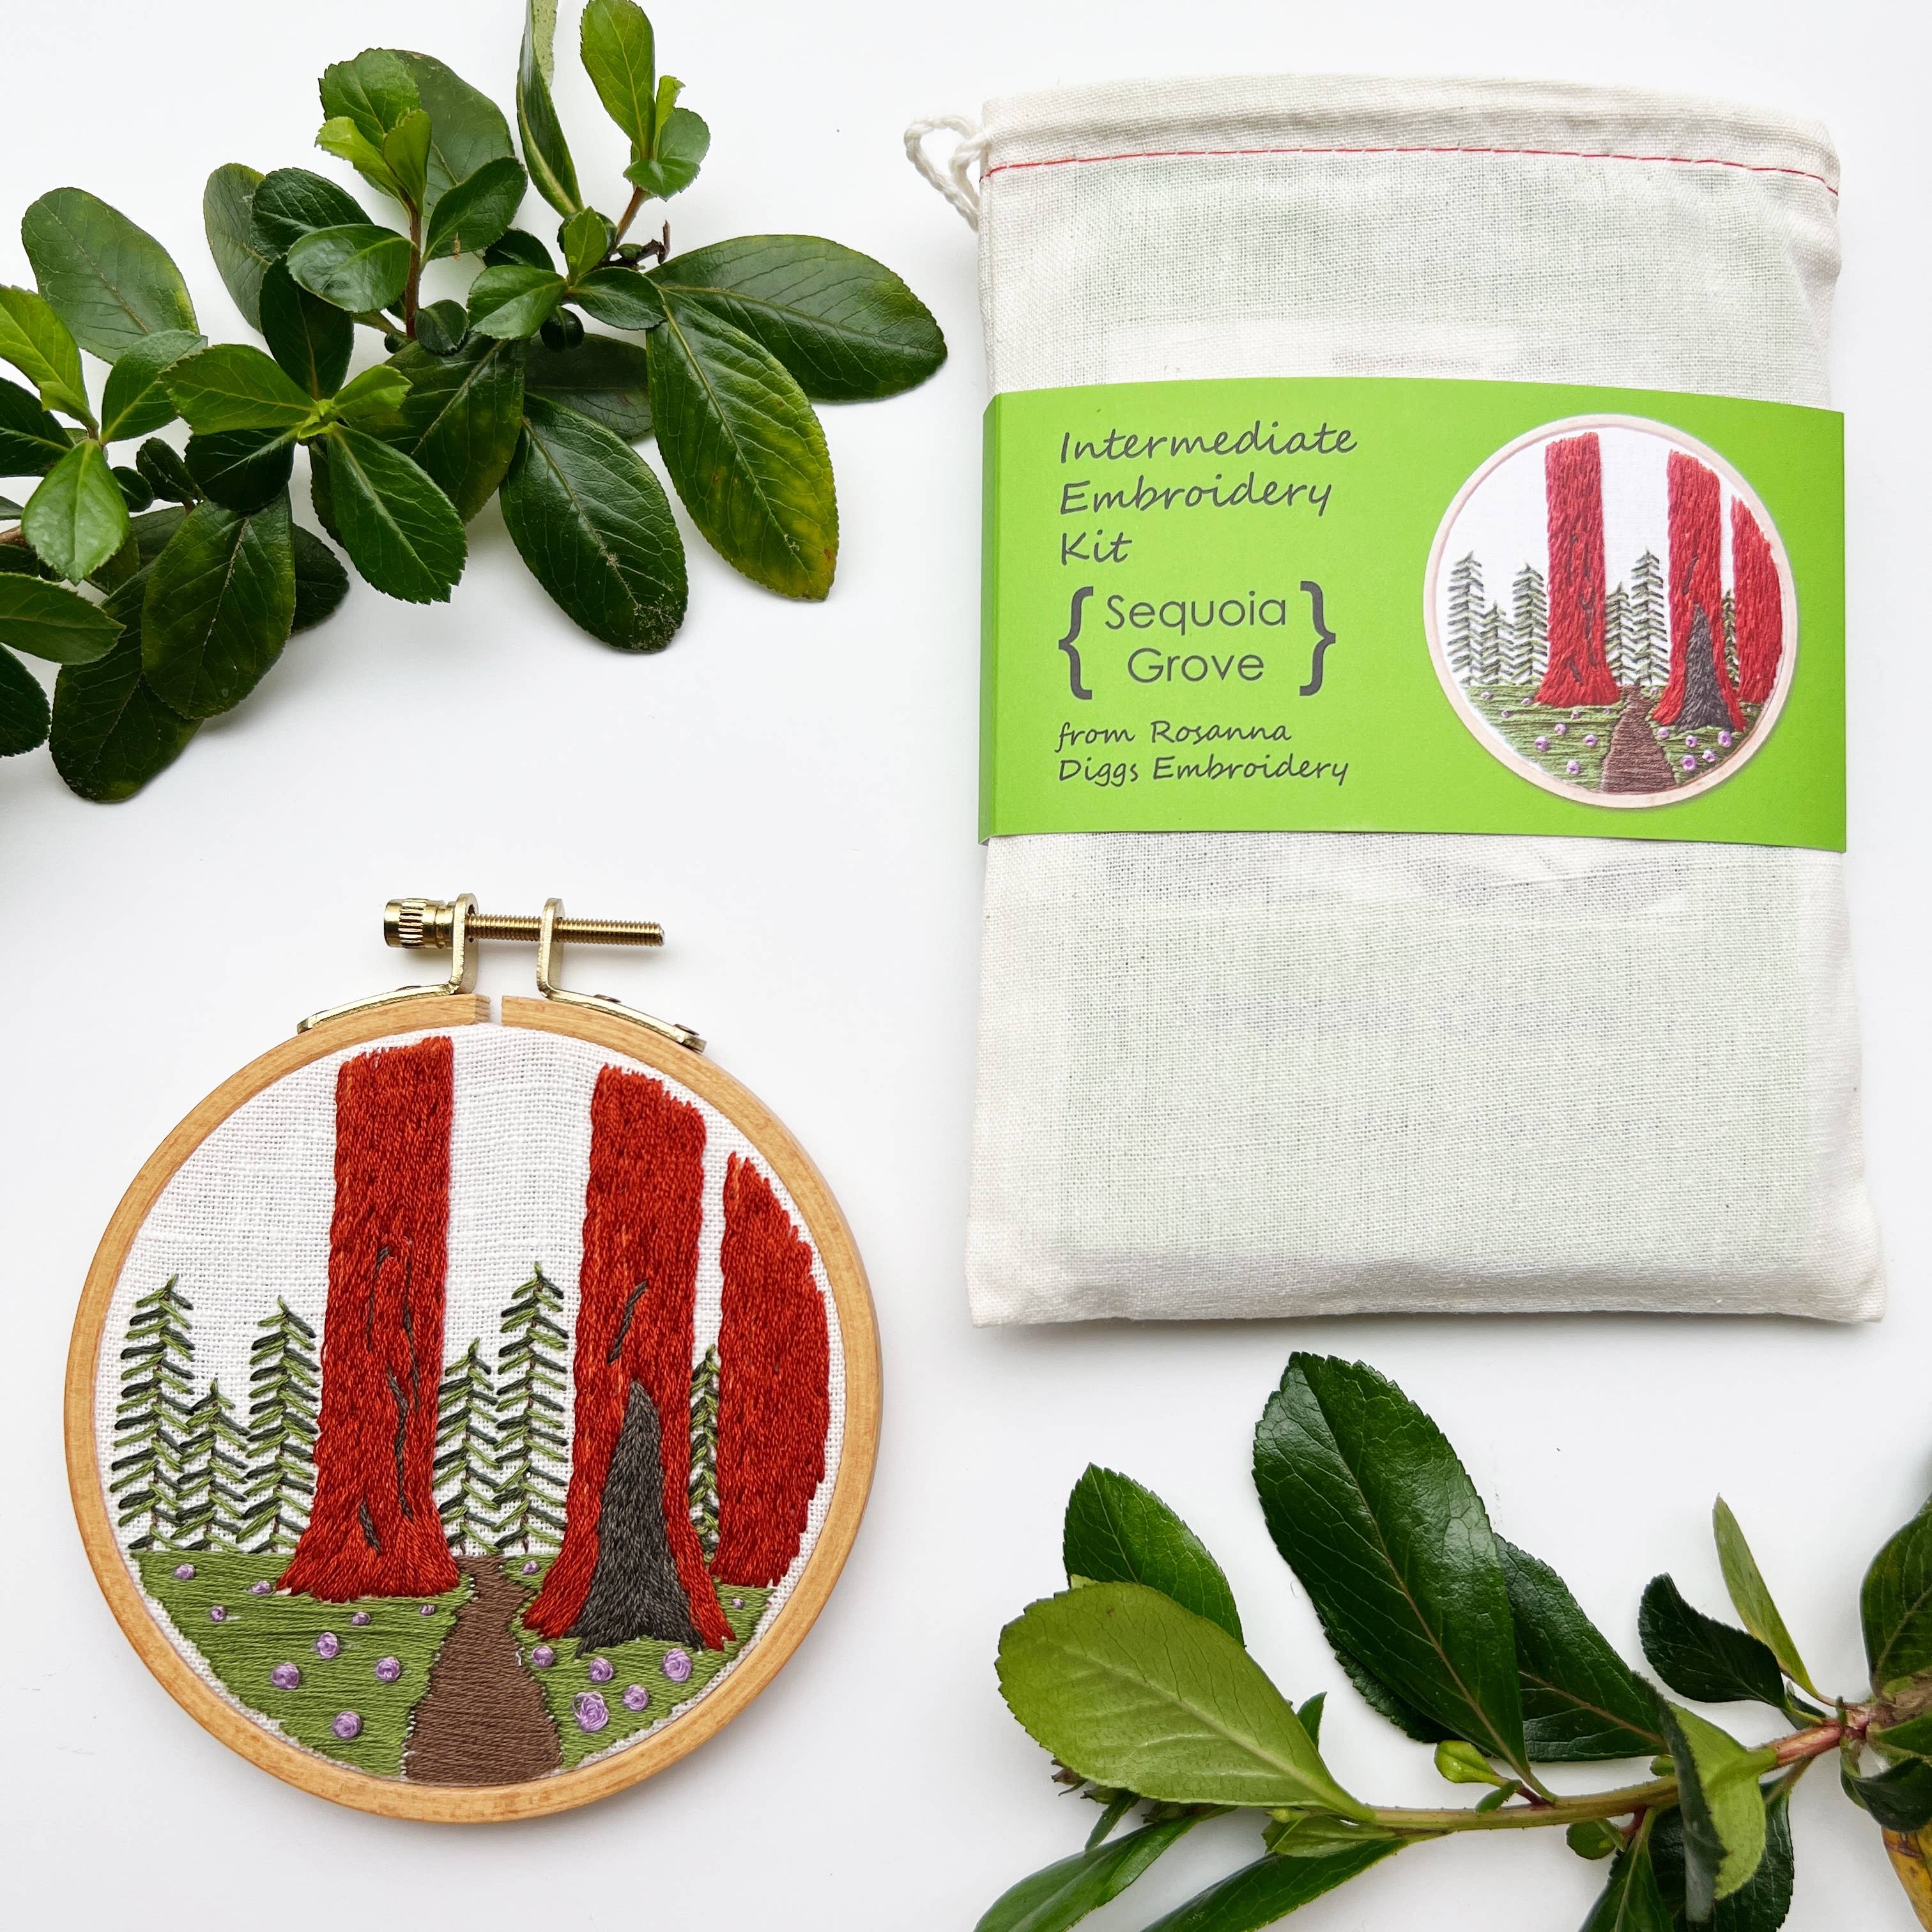 Sequoia Grove embroidery kit